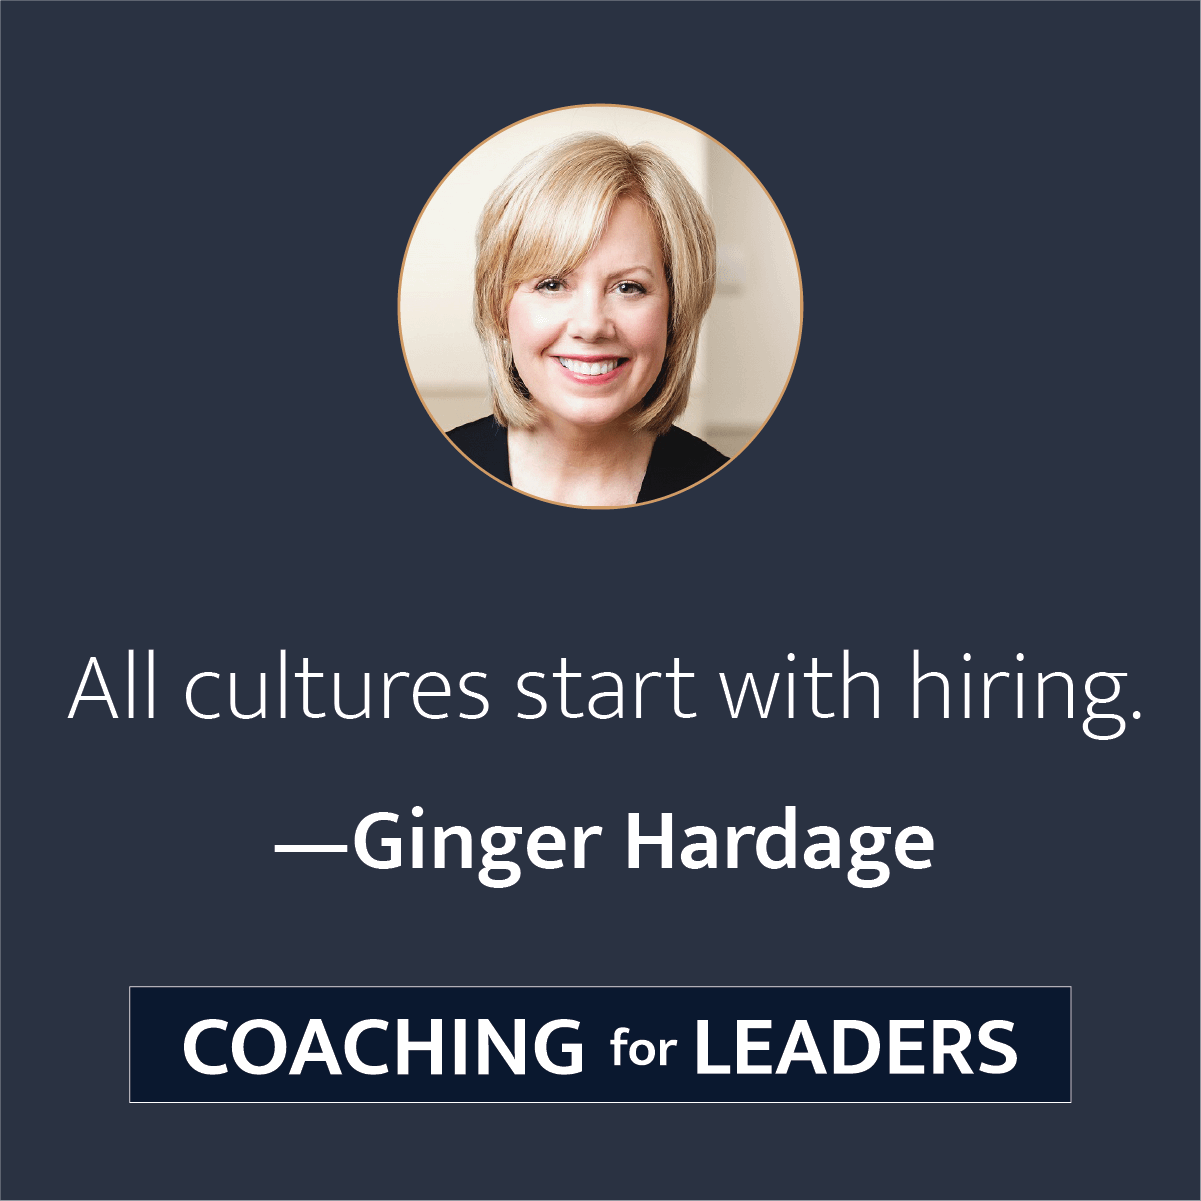 All cultures start with hiring.